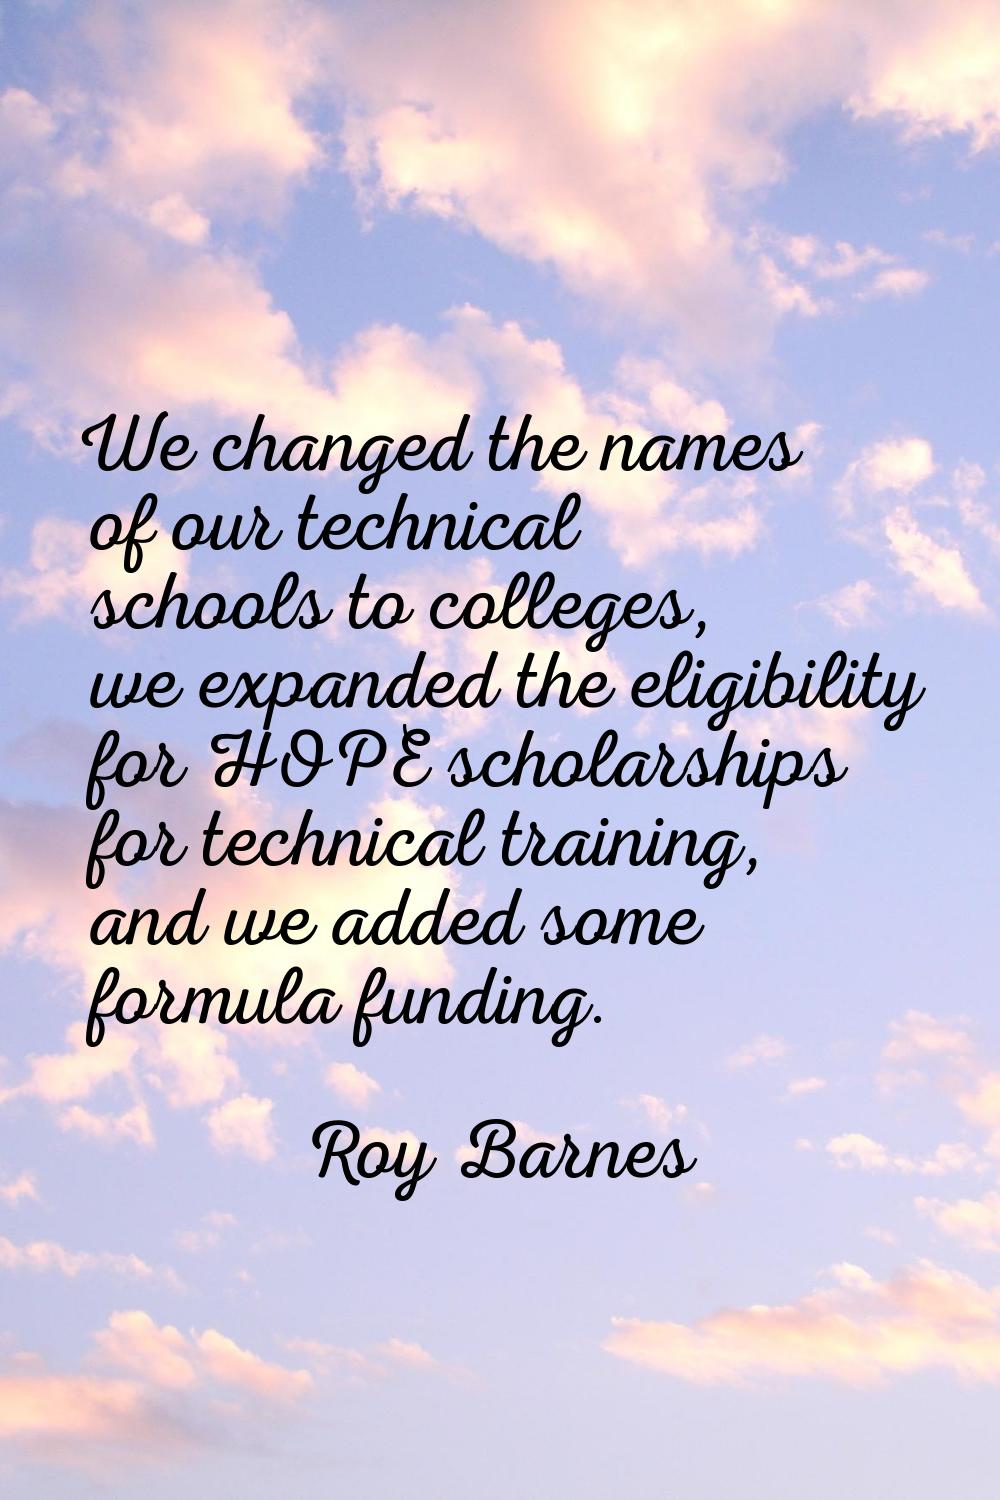 We changed the names of our technical schools to colleges, we expanded the eligibility for HOPE sch